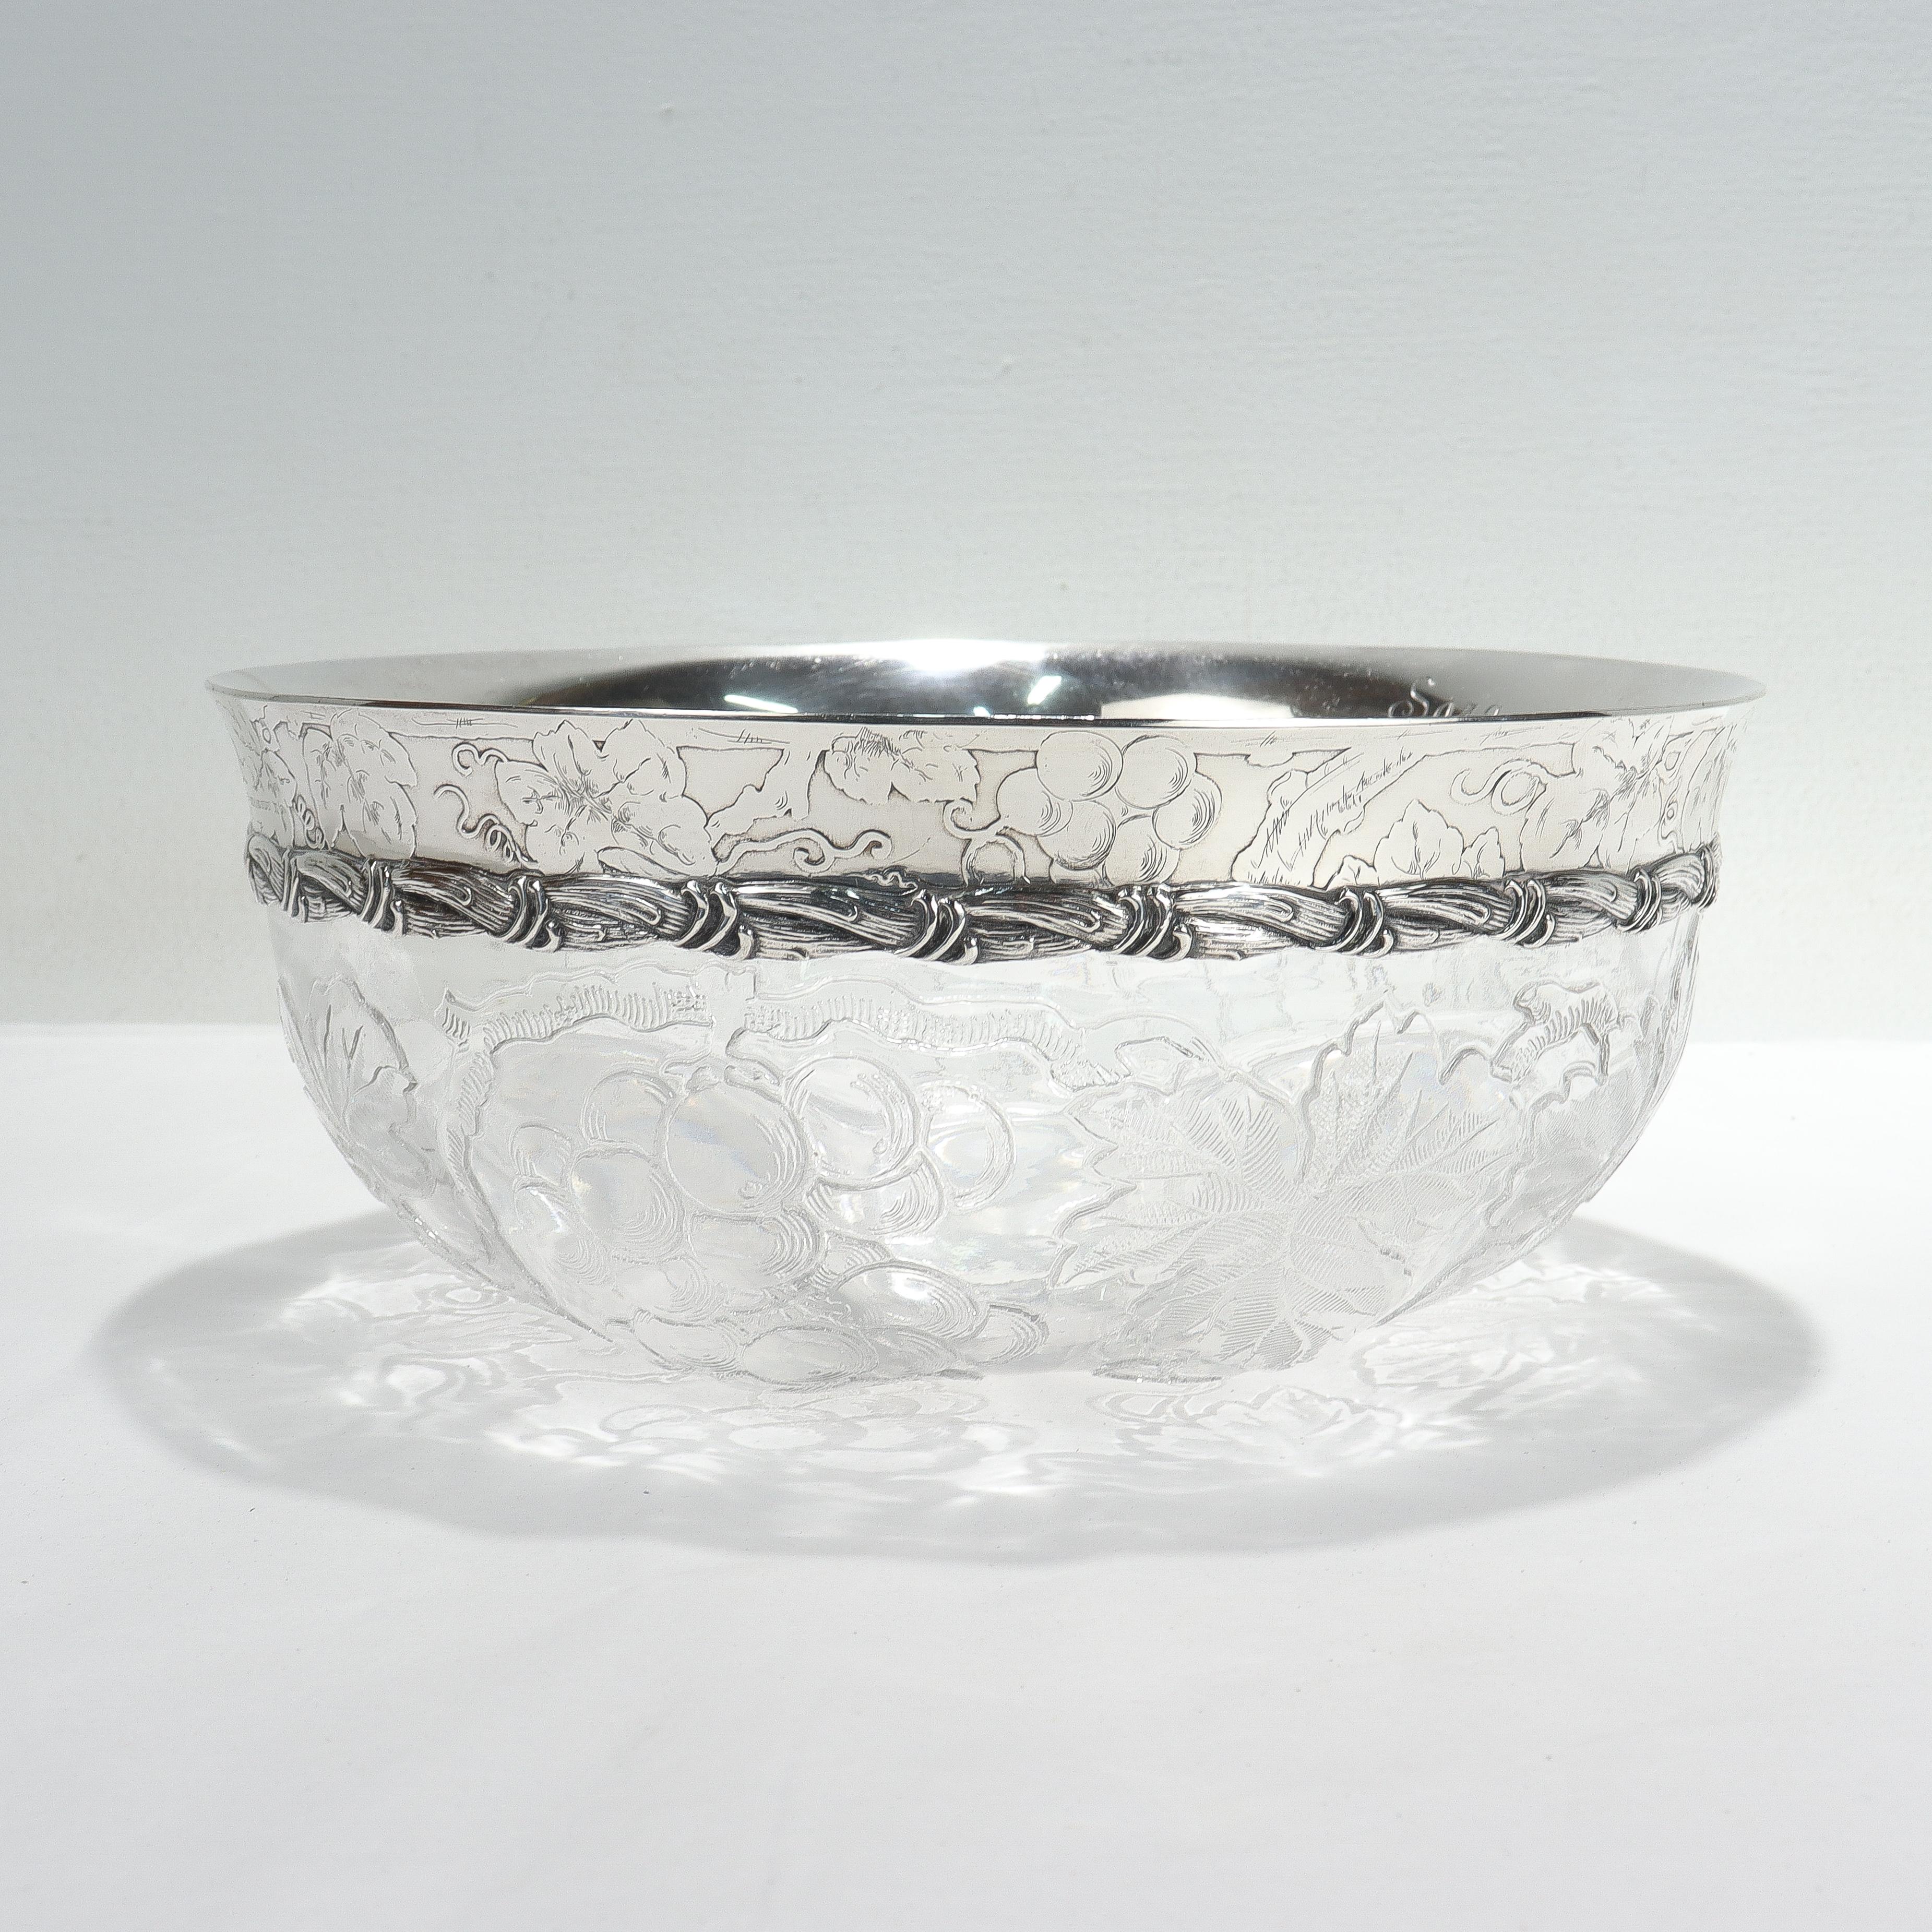 20th Century Antique Tiffany & Co. Sterling Silver Mounted 'Rock Crystal' Cut Glass Bowl